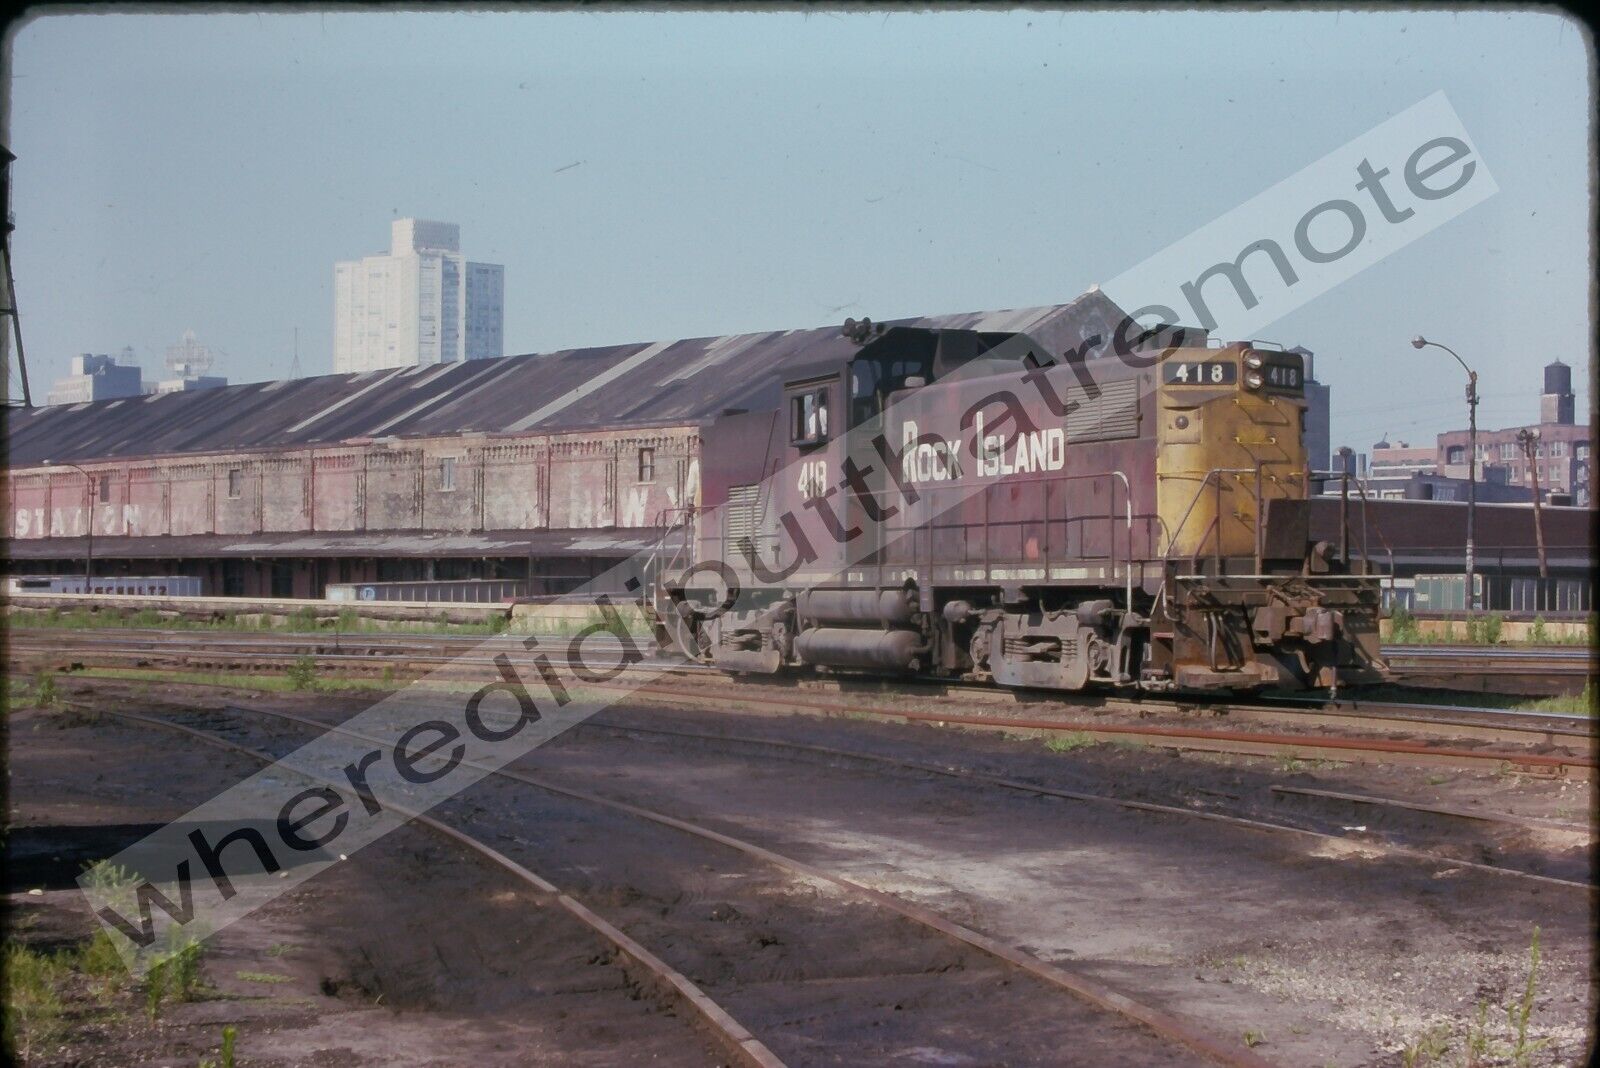 Orig. Slide Chicago Rock Island & Pacific CRIP 418 C415 16th St Chicago 7-15-74